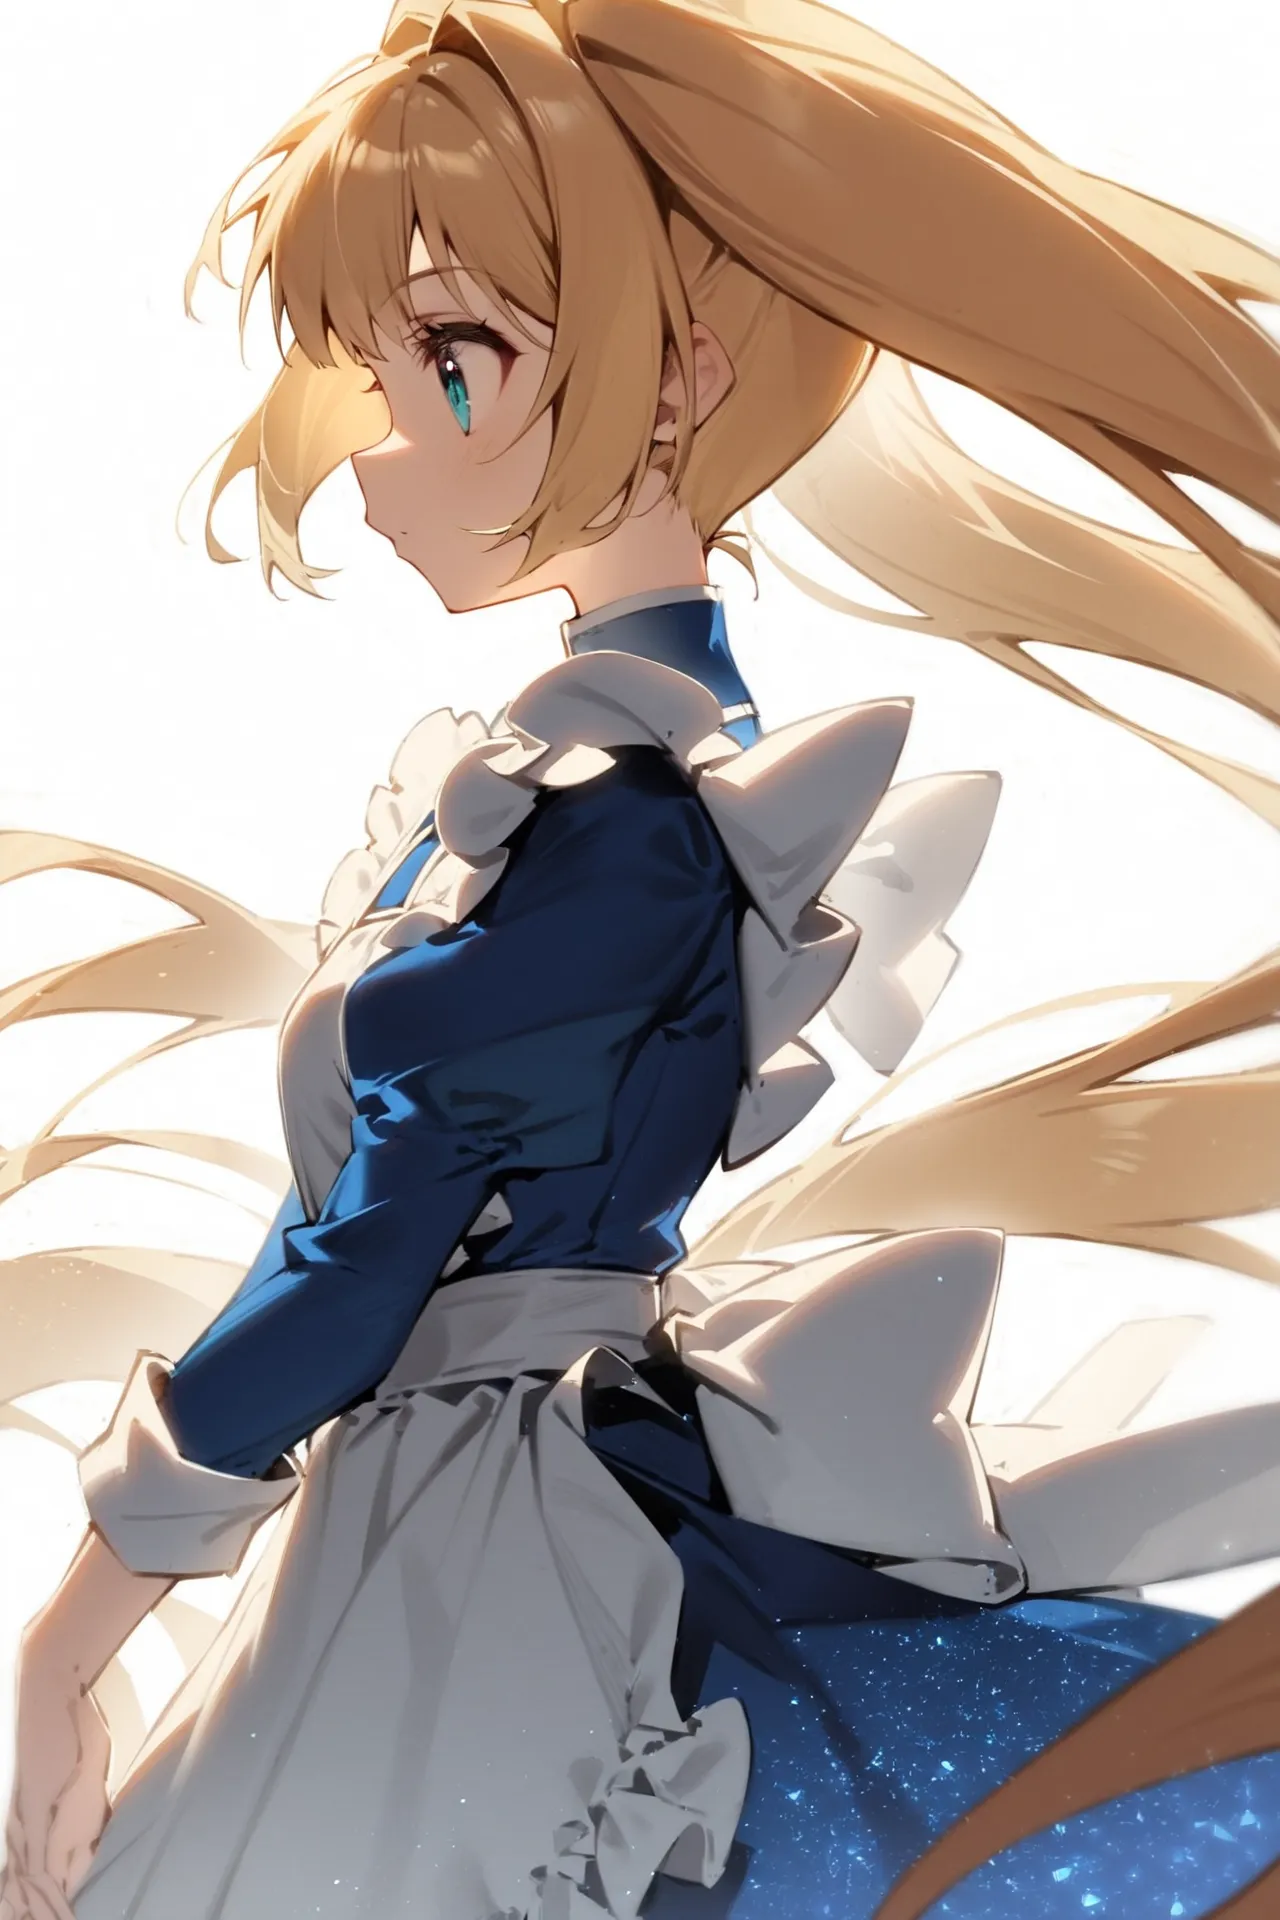 '1girl, from side,\nblonde hair, twintails, blue dress, white apron,\nwhite background,\nAlice in glitterworld\nNegative prompt: (worst quality, low quality:1.4), nsfw\nSteps: 35, Sampler: DPM++ 2M SDE Karras, CFG scale: 7, Seed: 1, Size: 640x960, Model hash: 642b08ca49, Model: ConfusionXL2.0_fp16_vae, VAE hash: 63aeecb90f, VAE: sdxl_vae_0.9.safetensors, Denoising strength: 0.6, Clip skip: 2, Hires upscale: 2, Hires steps: 15, Hires upscaler: ESRGAN_4x, Eta: 0.68, Version: v1.7.0'